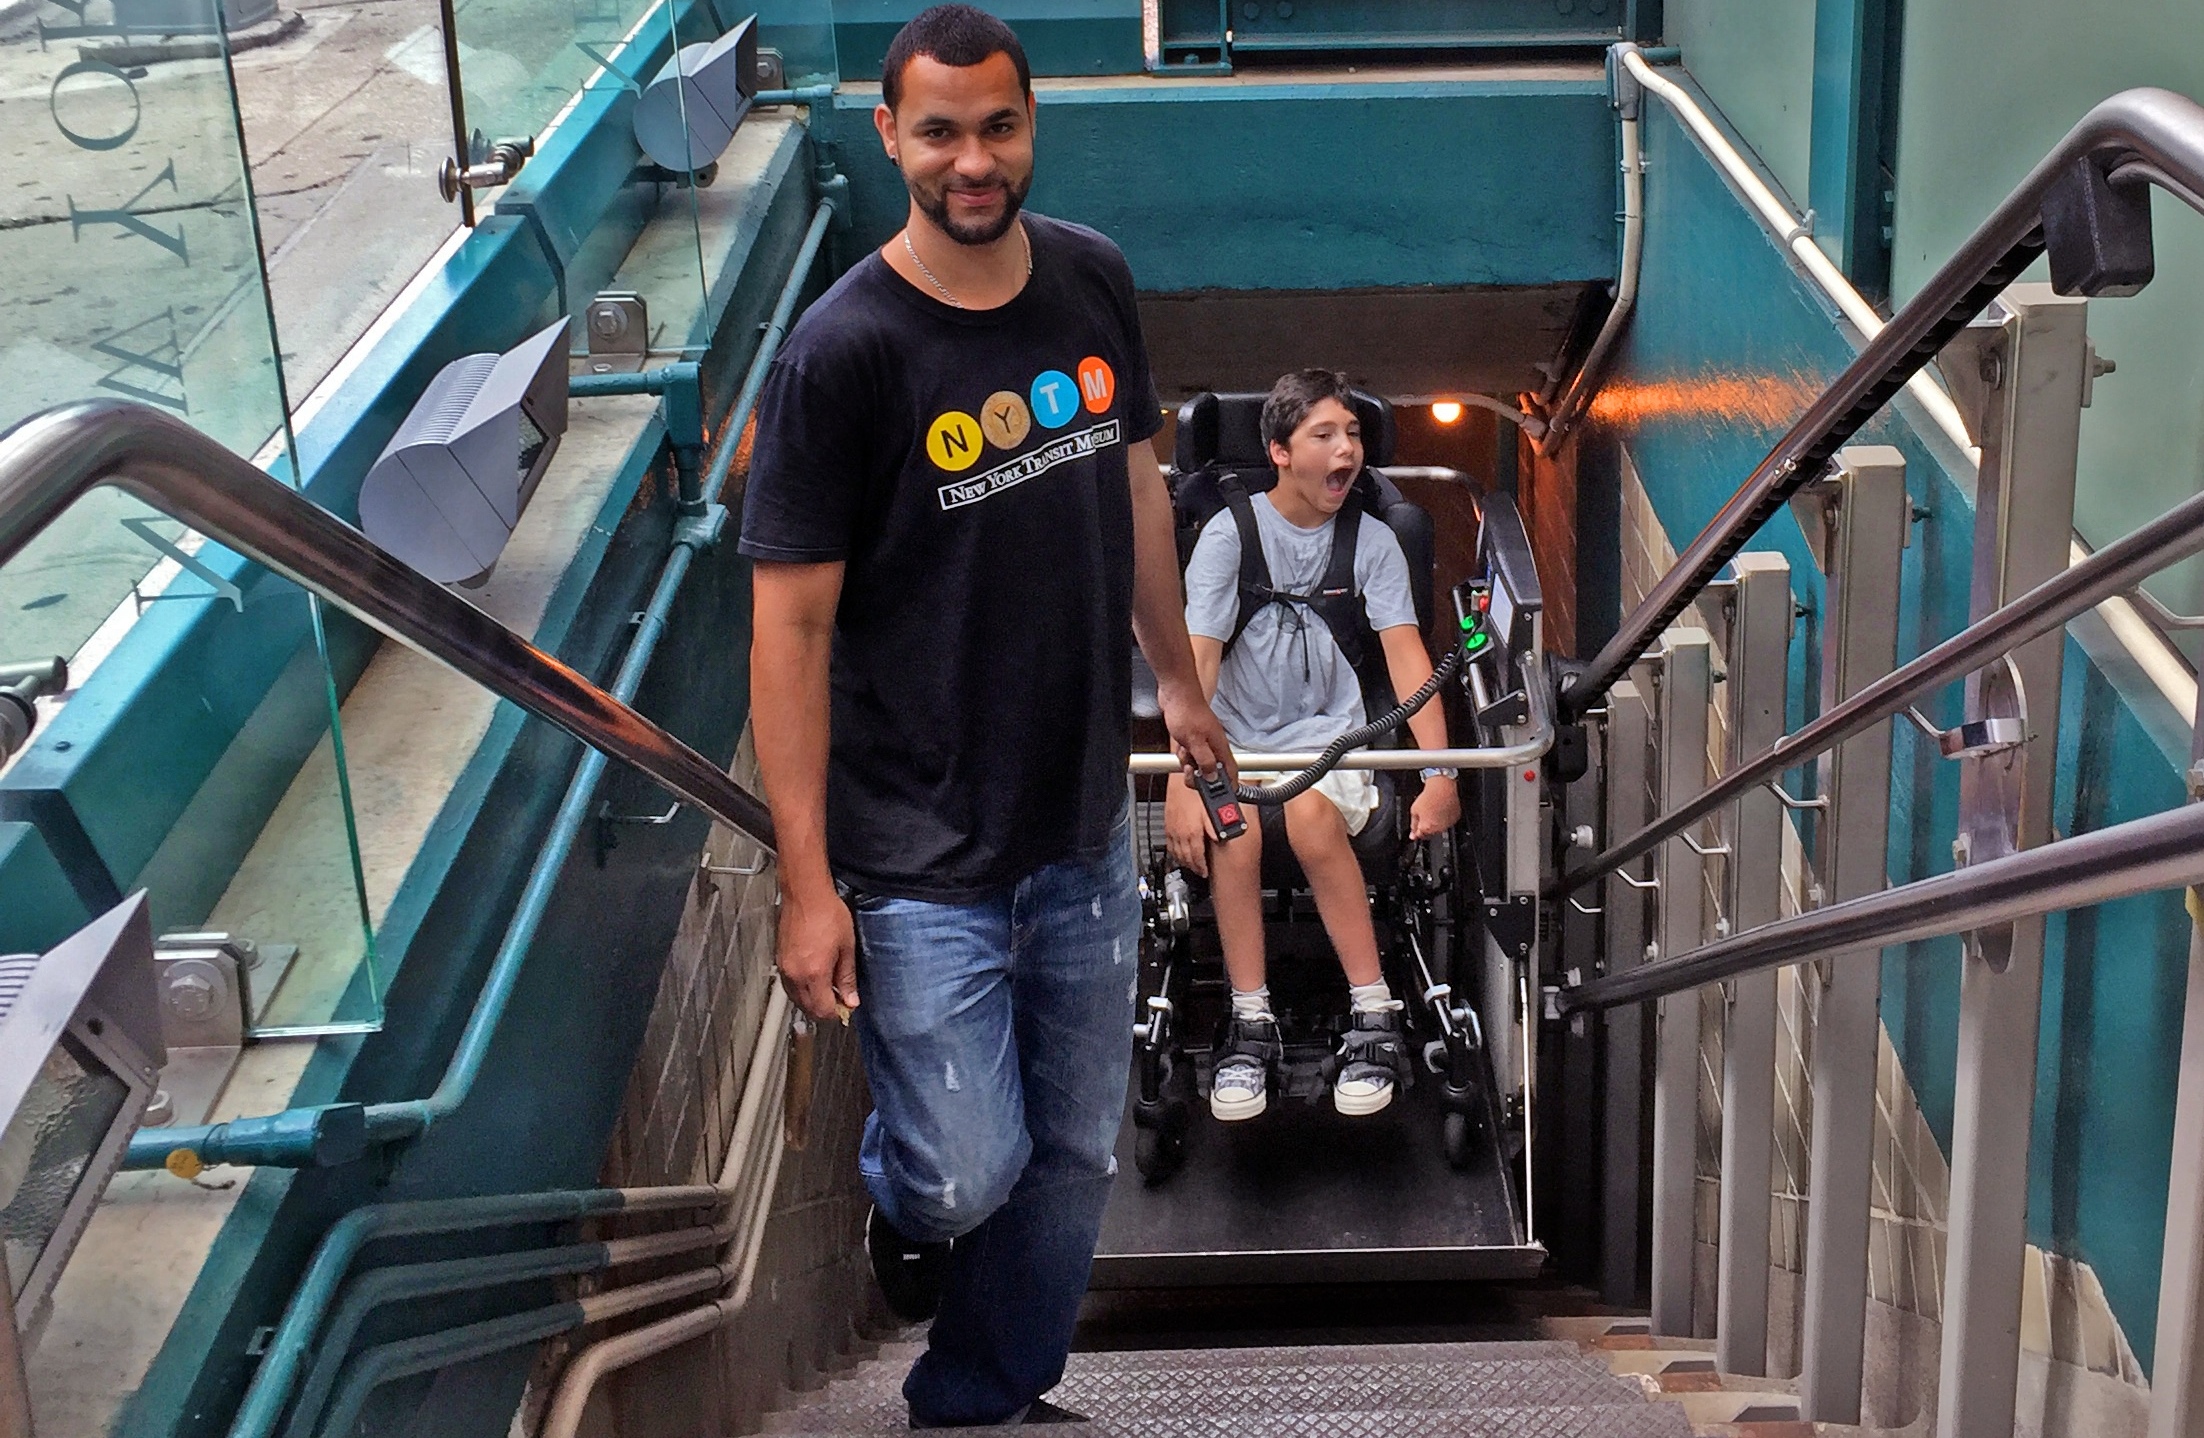 Transit Museum staff member operating the Museum's wheelchair lift for young transit fan.